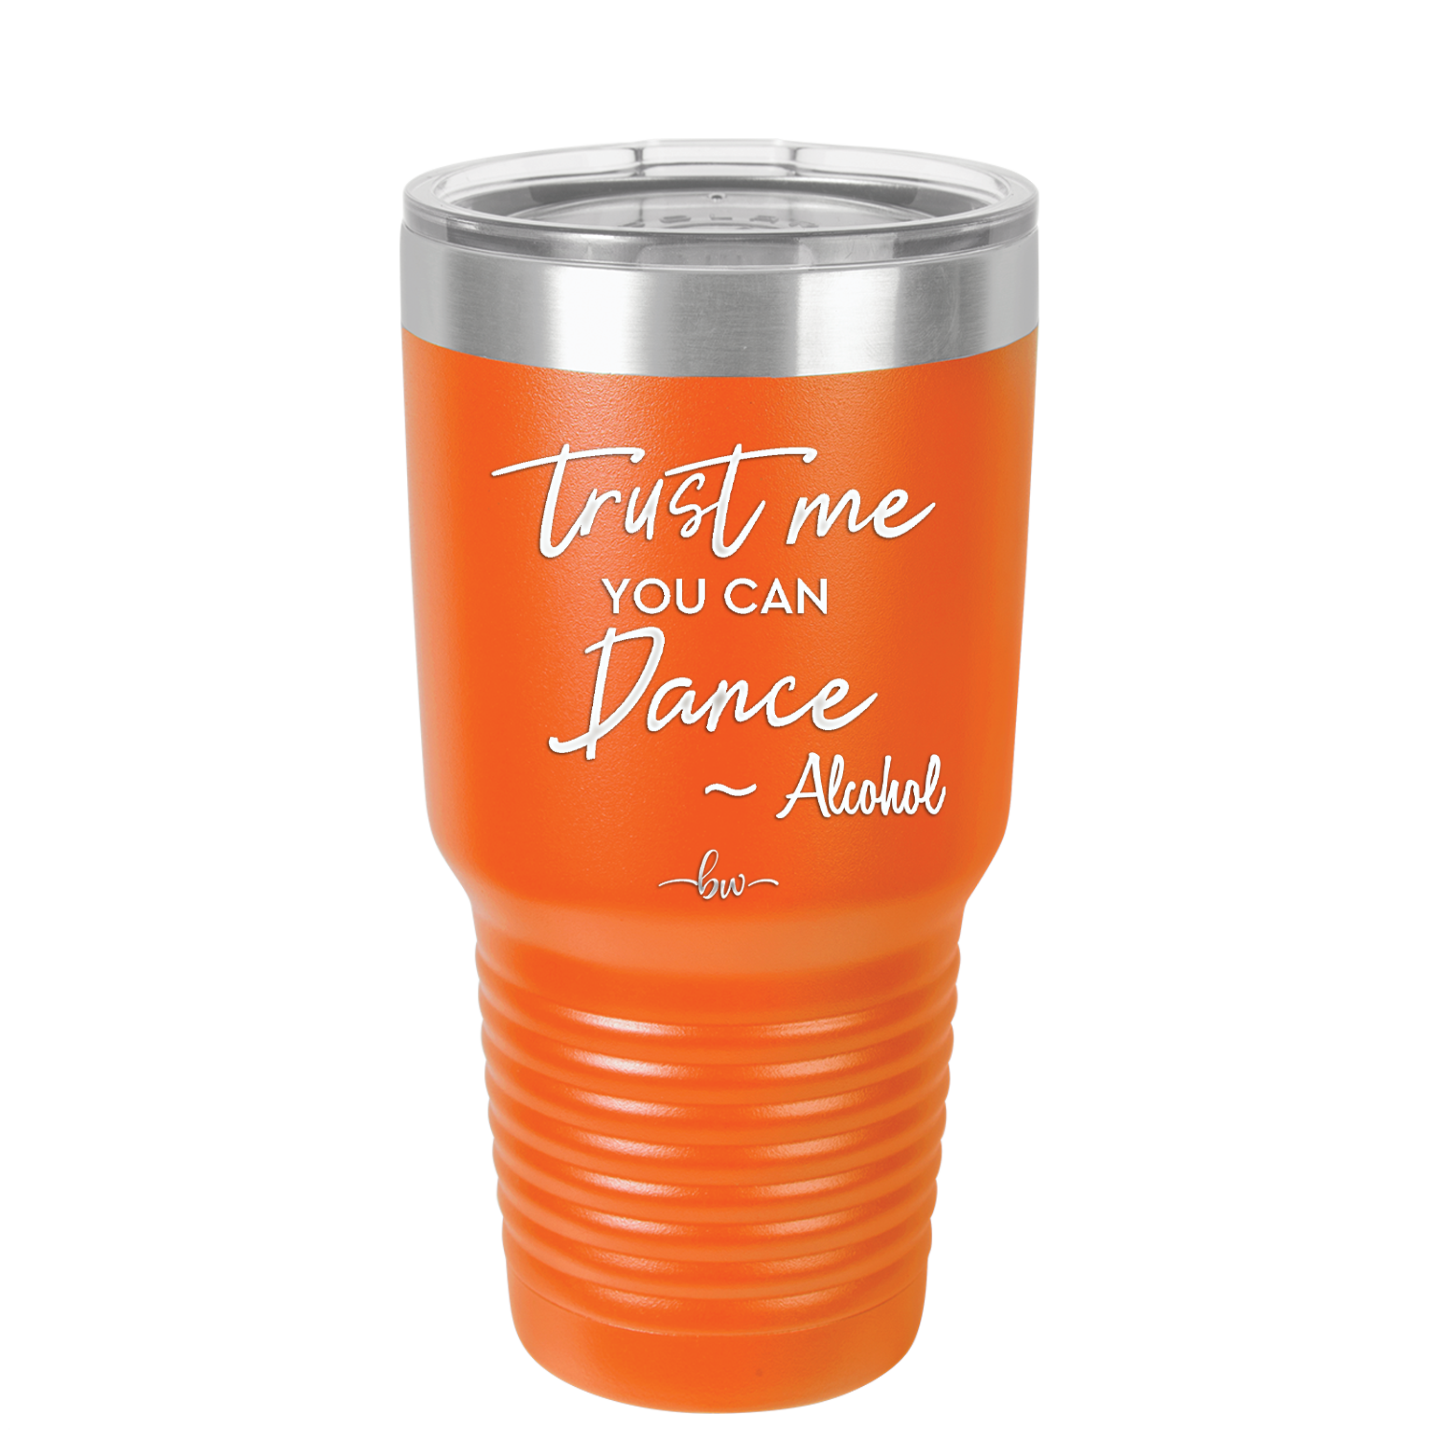 Trust Me You Can Dance ~Alcohol - Laser Engraved Stainless Steel Drinkware - 1307 -